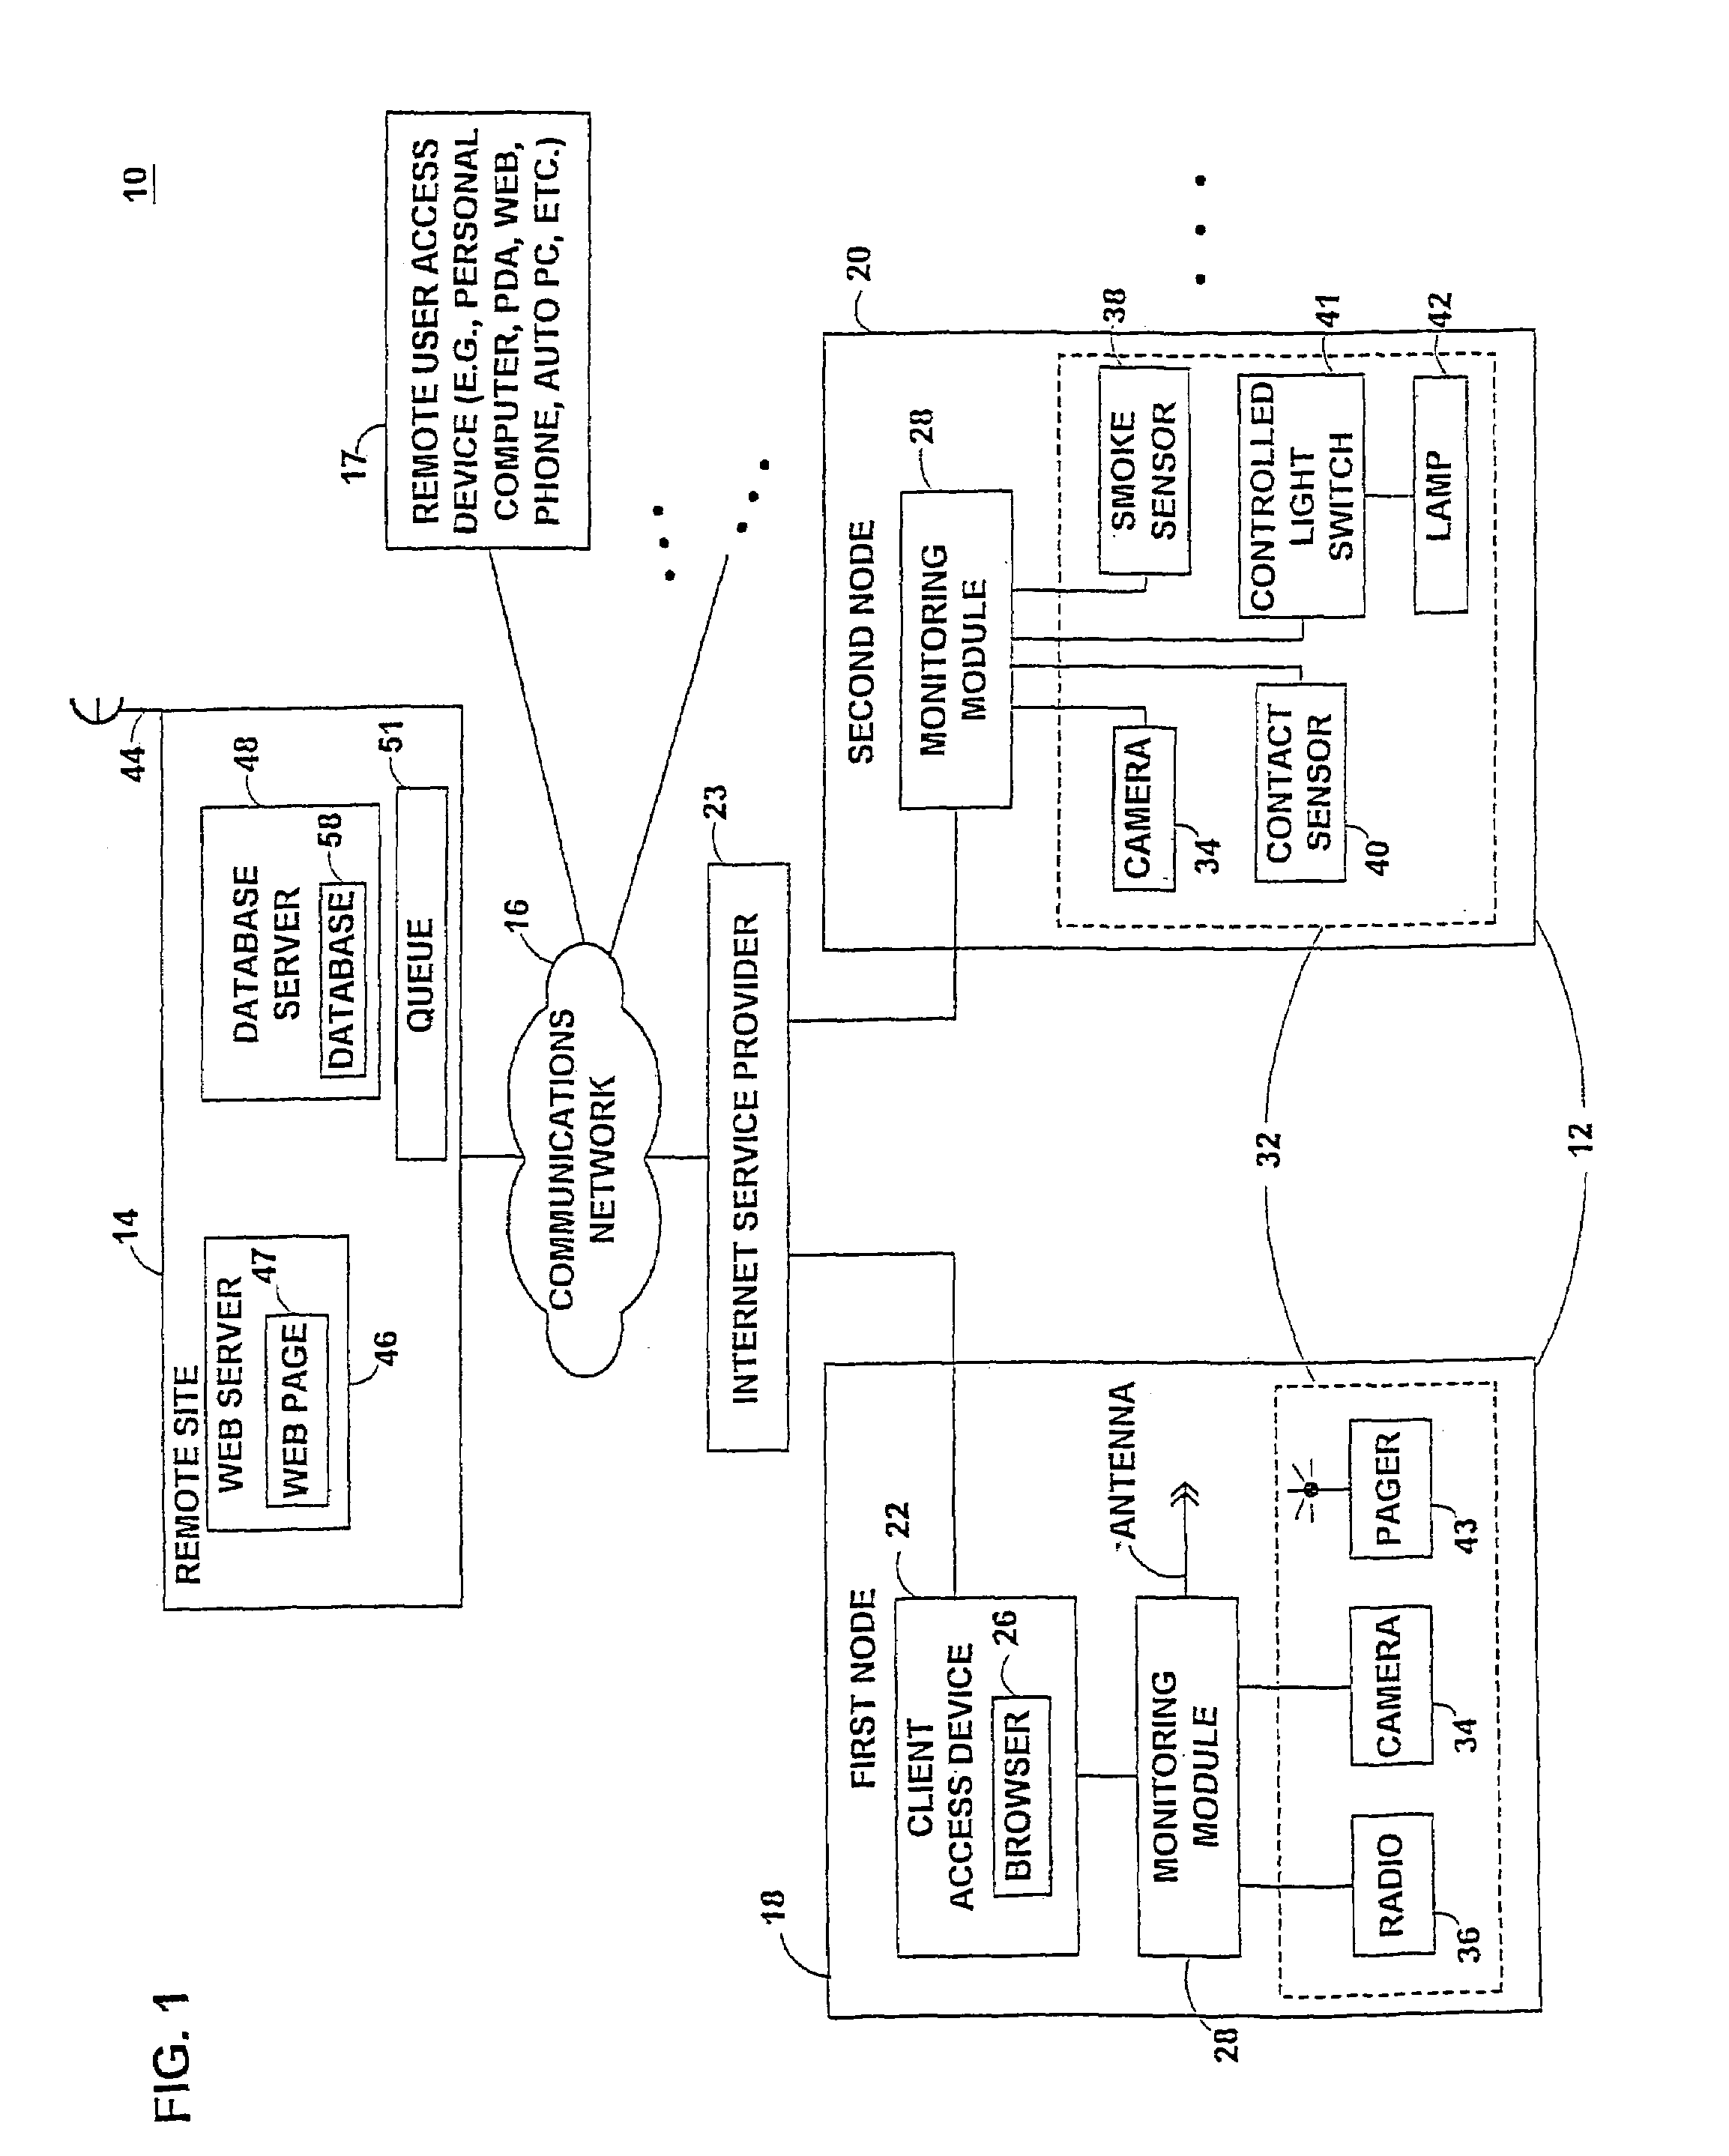 Method and system for adaptively setting a data refresh interval